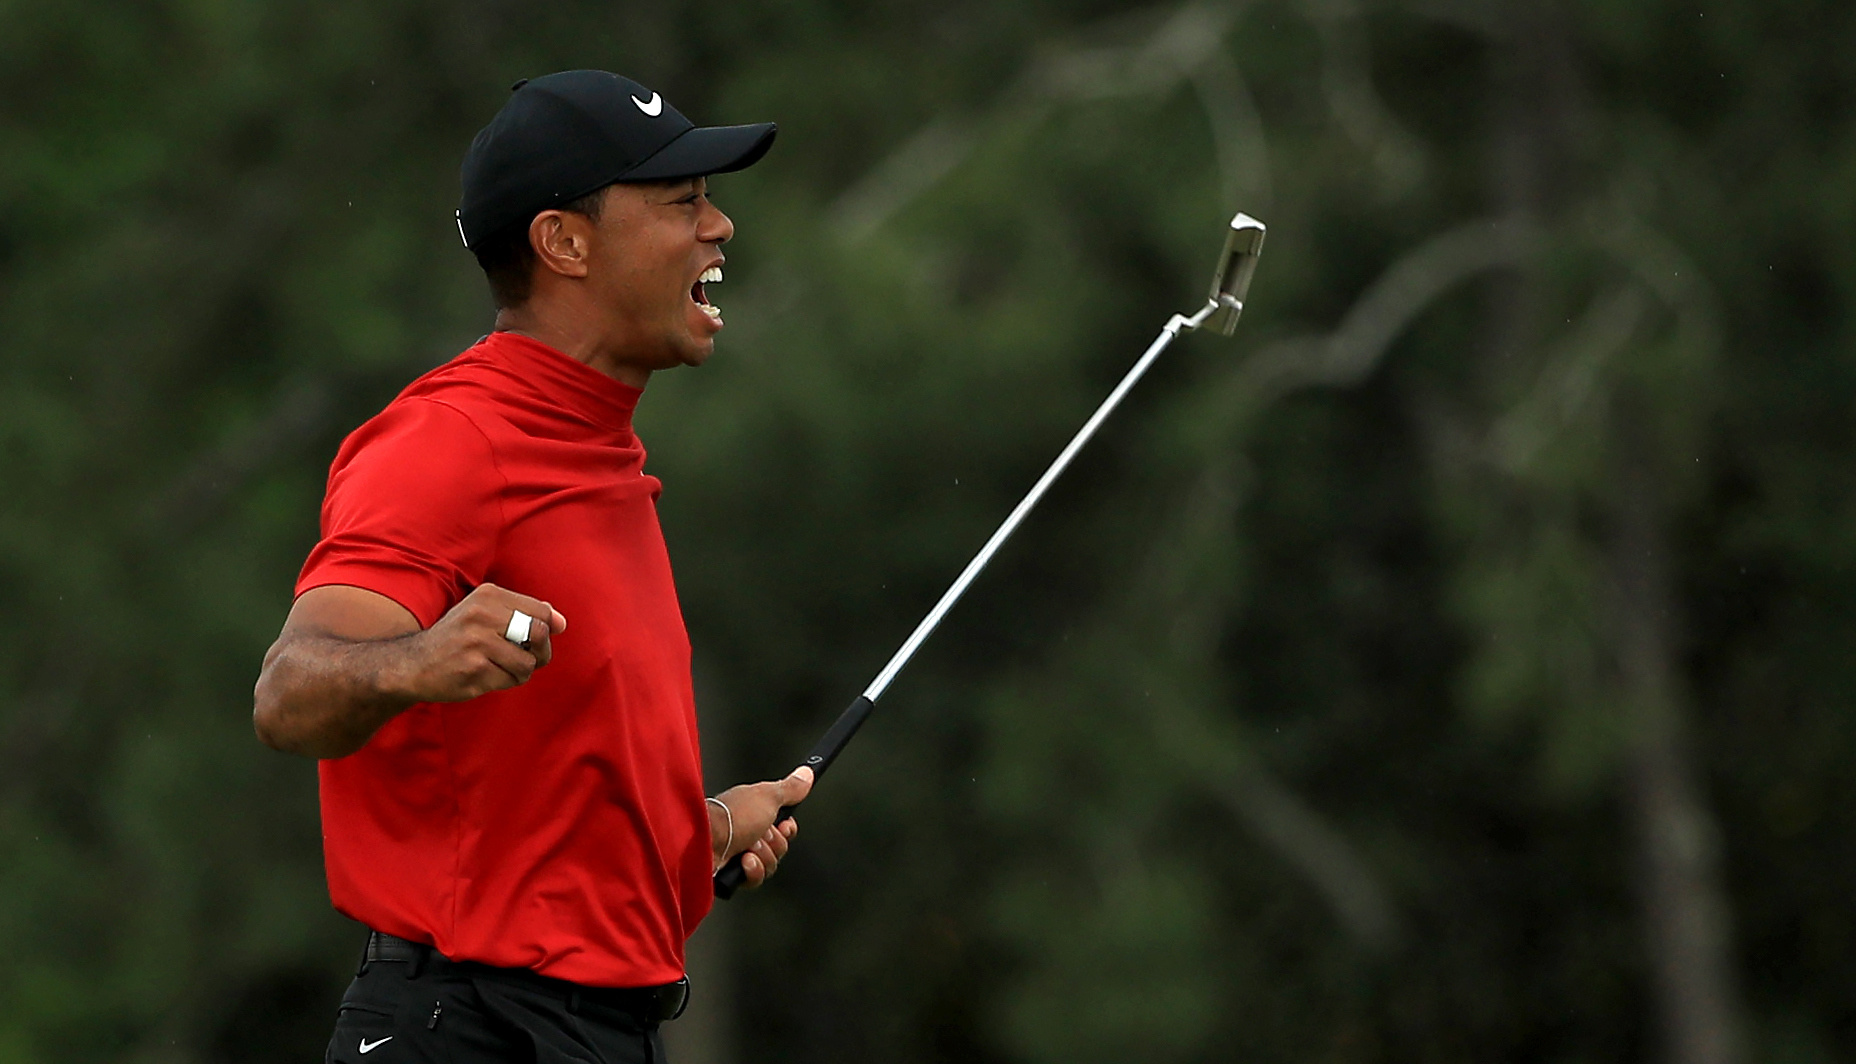 Tiger Woods of the United States celebrates winning the Masters during the final roubnd at Augusta National Golf Club on April 14, 2019 in Augusta, Georgia. (Photo by Mike Ehrmann/Getty Images)